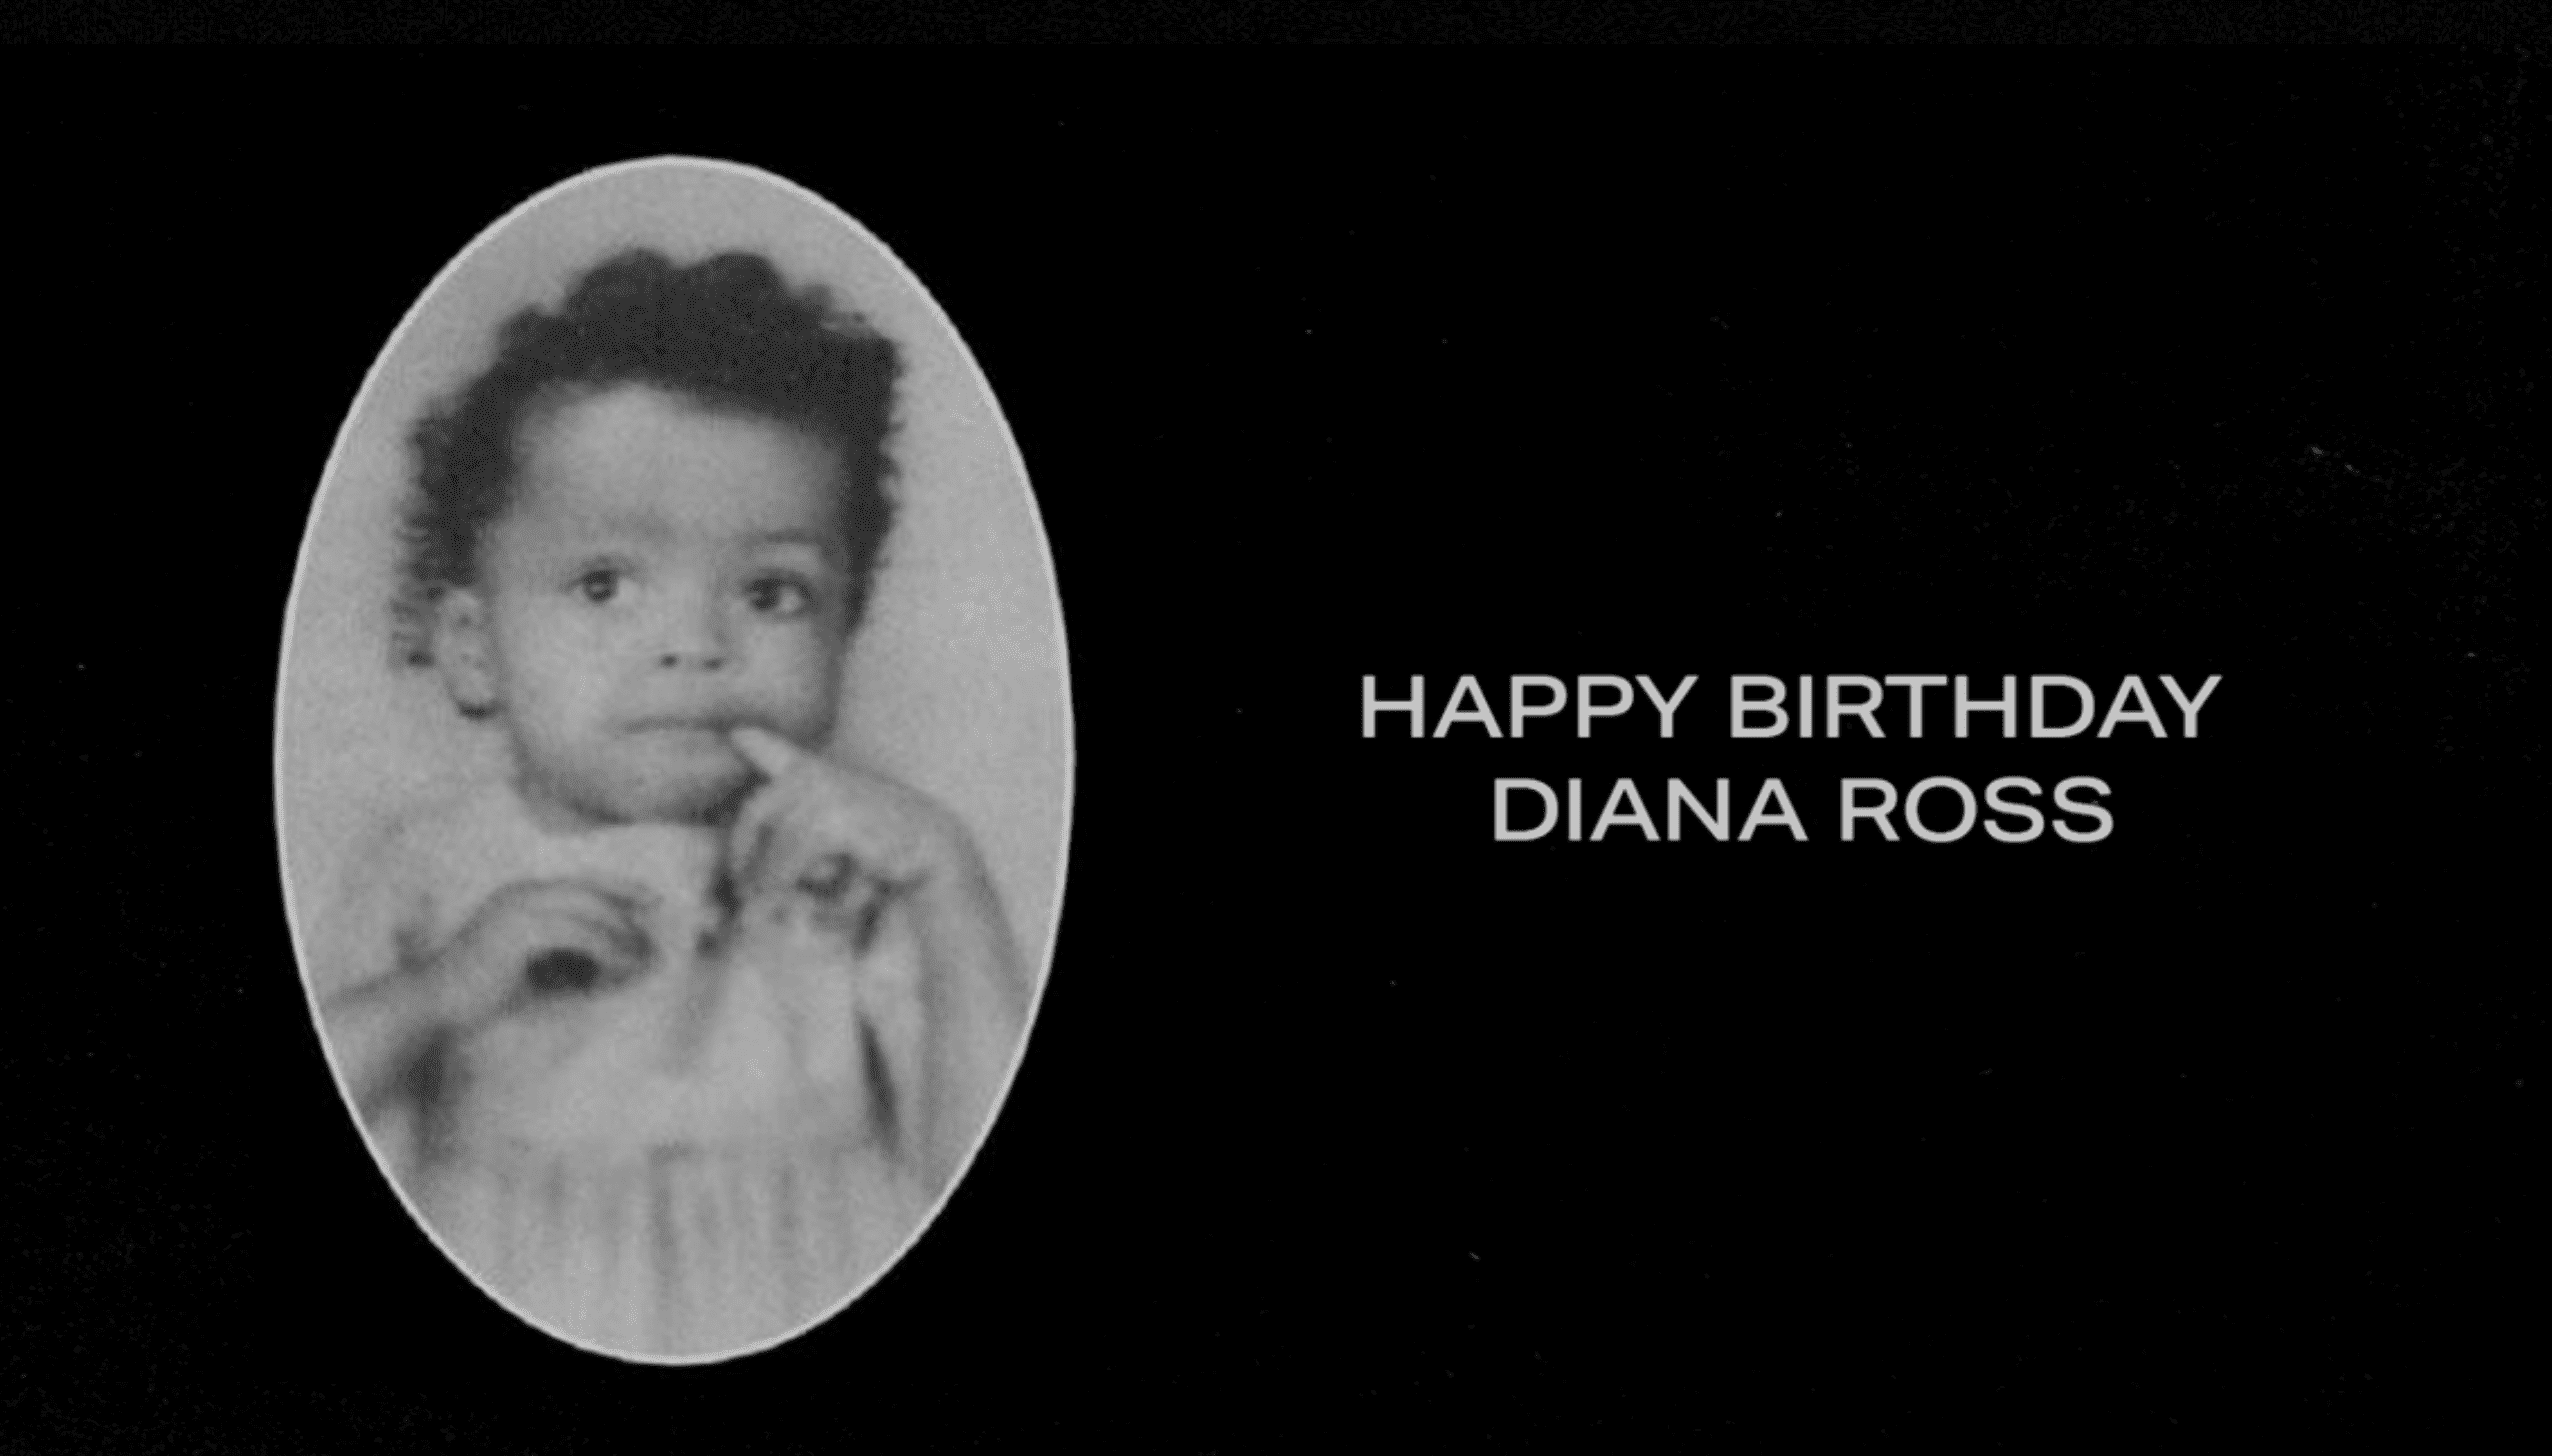 Diana Ross as a baby. | Source: beyonce.com